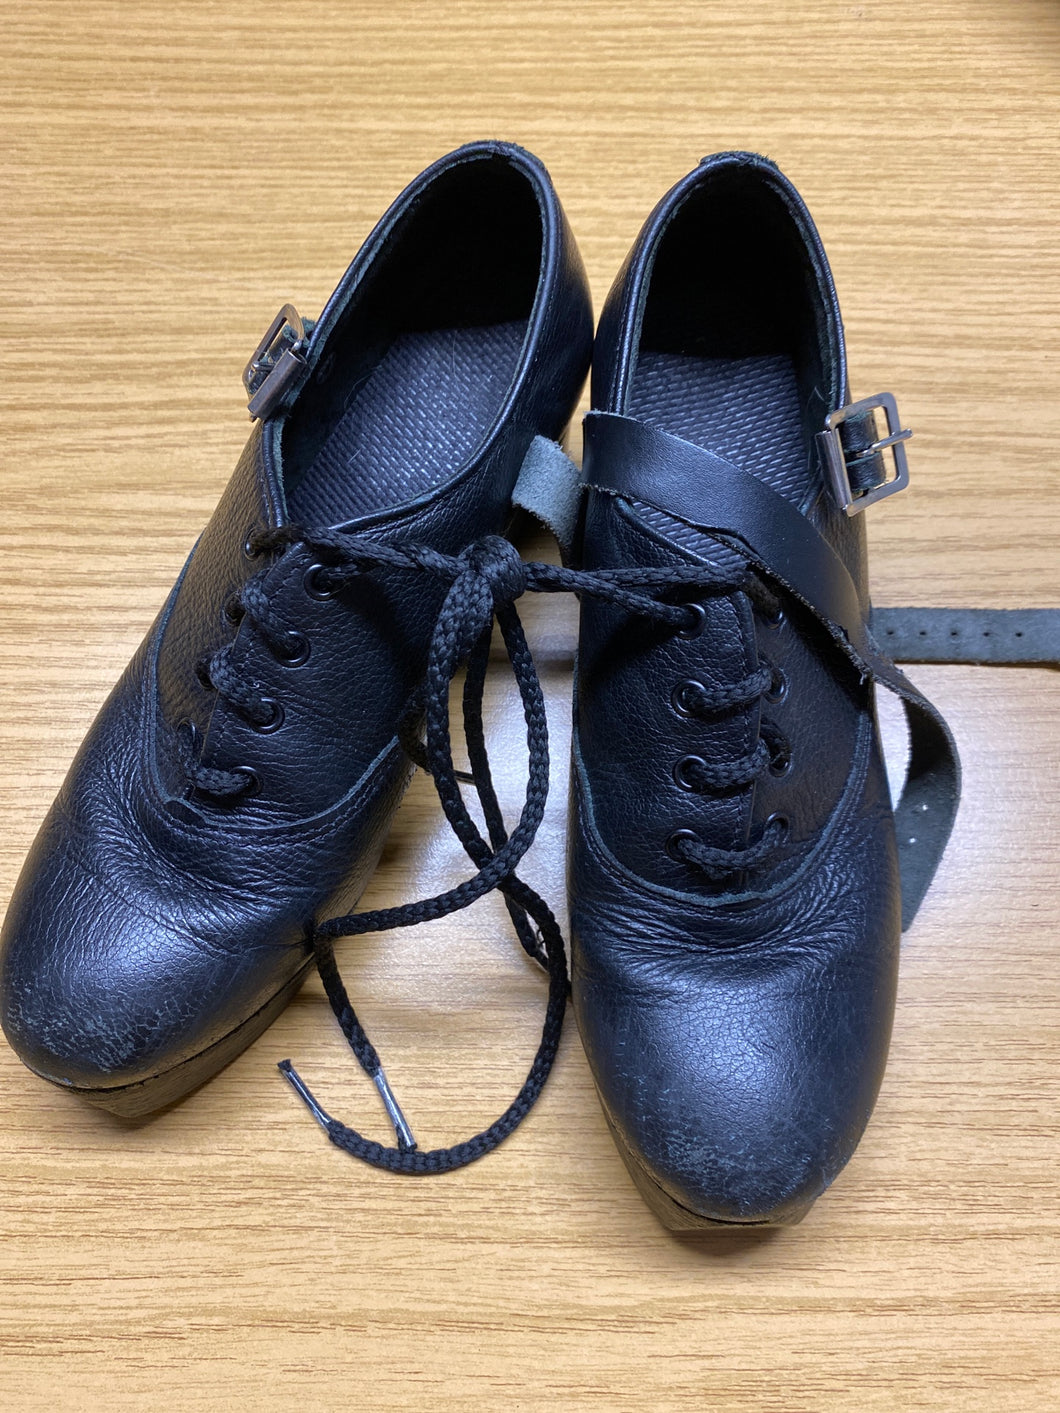 Antonio Pacelli Hardshoes Essential // Size 35 ; 2,5 // Condition: Very used // Nr. 66